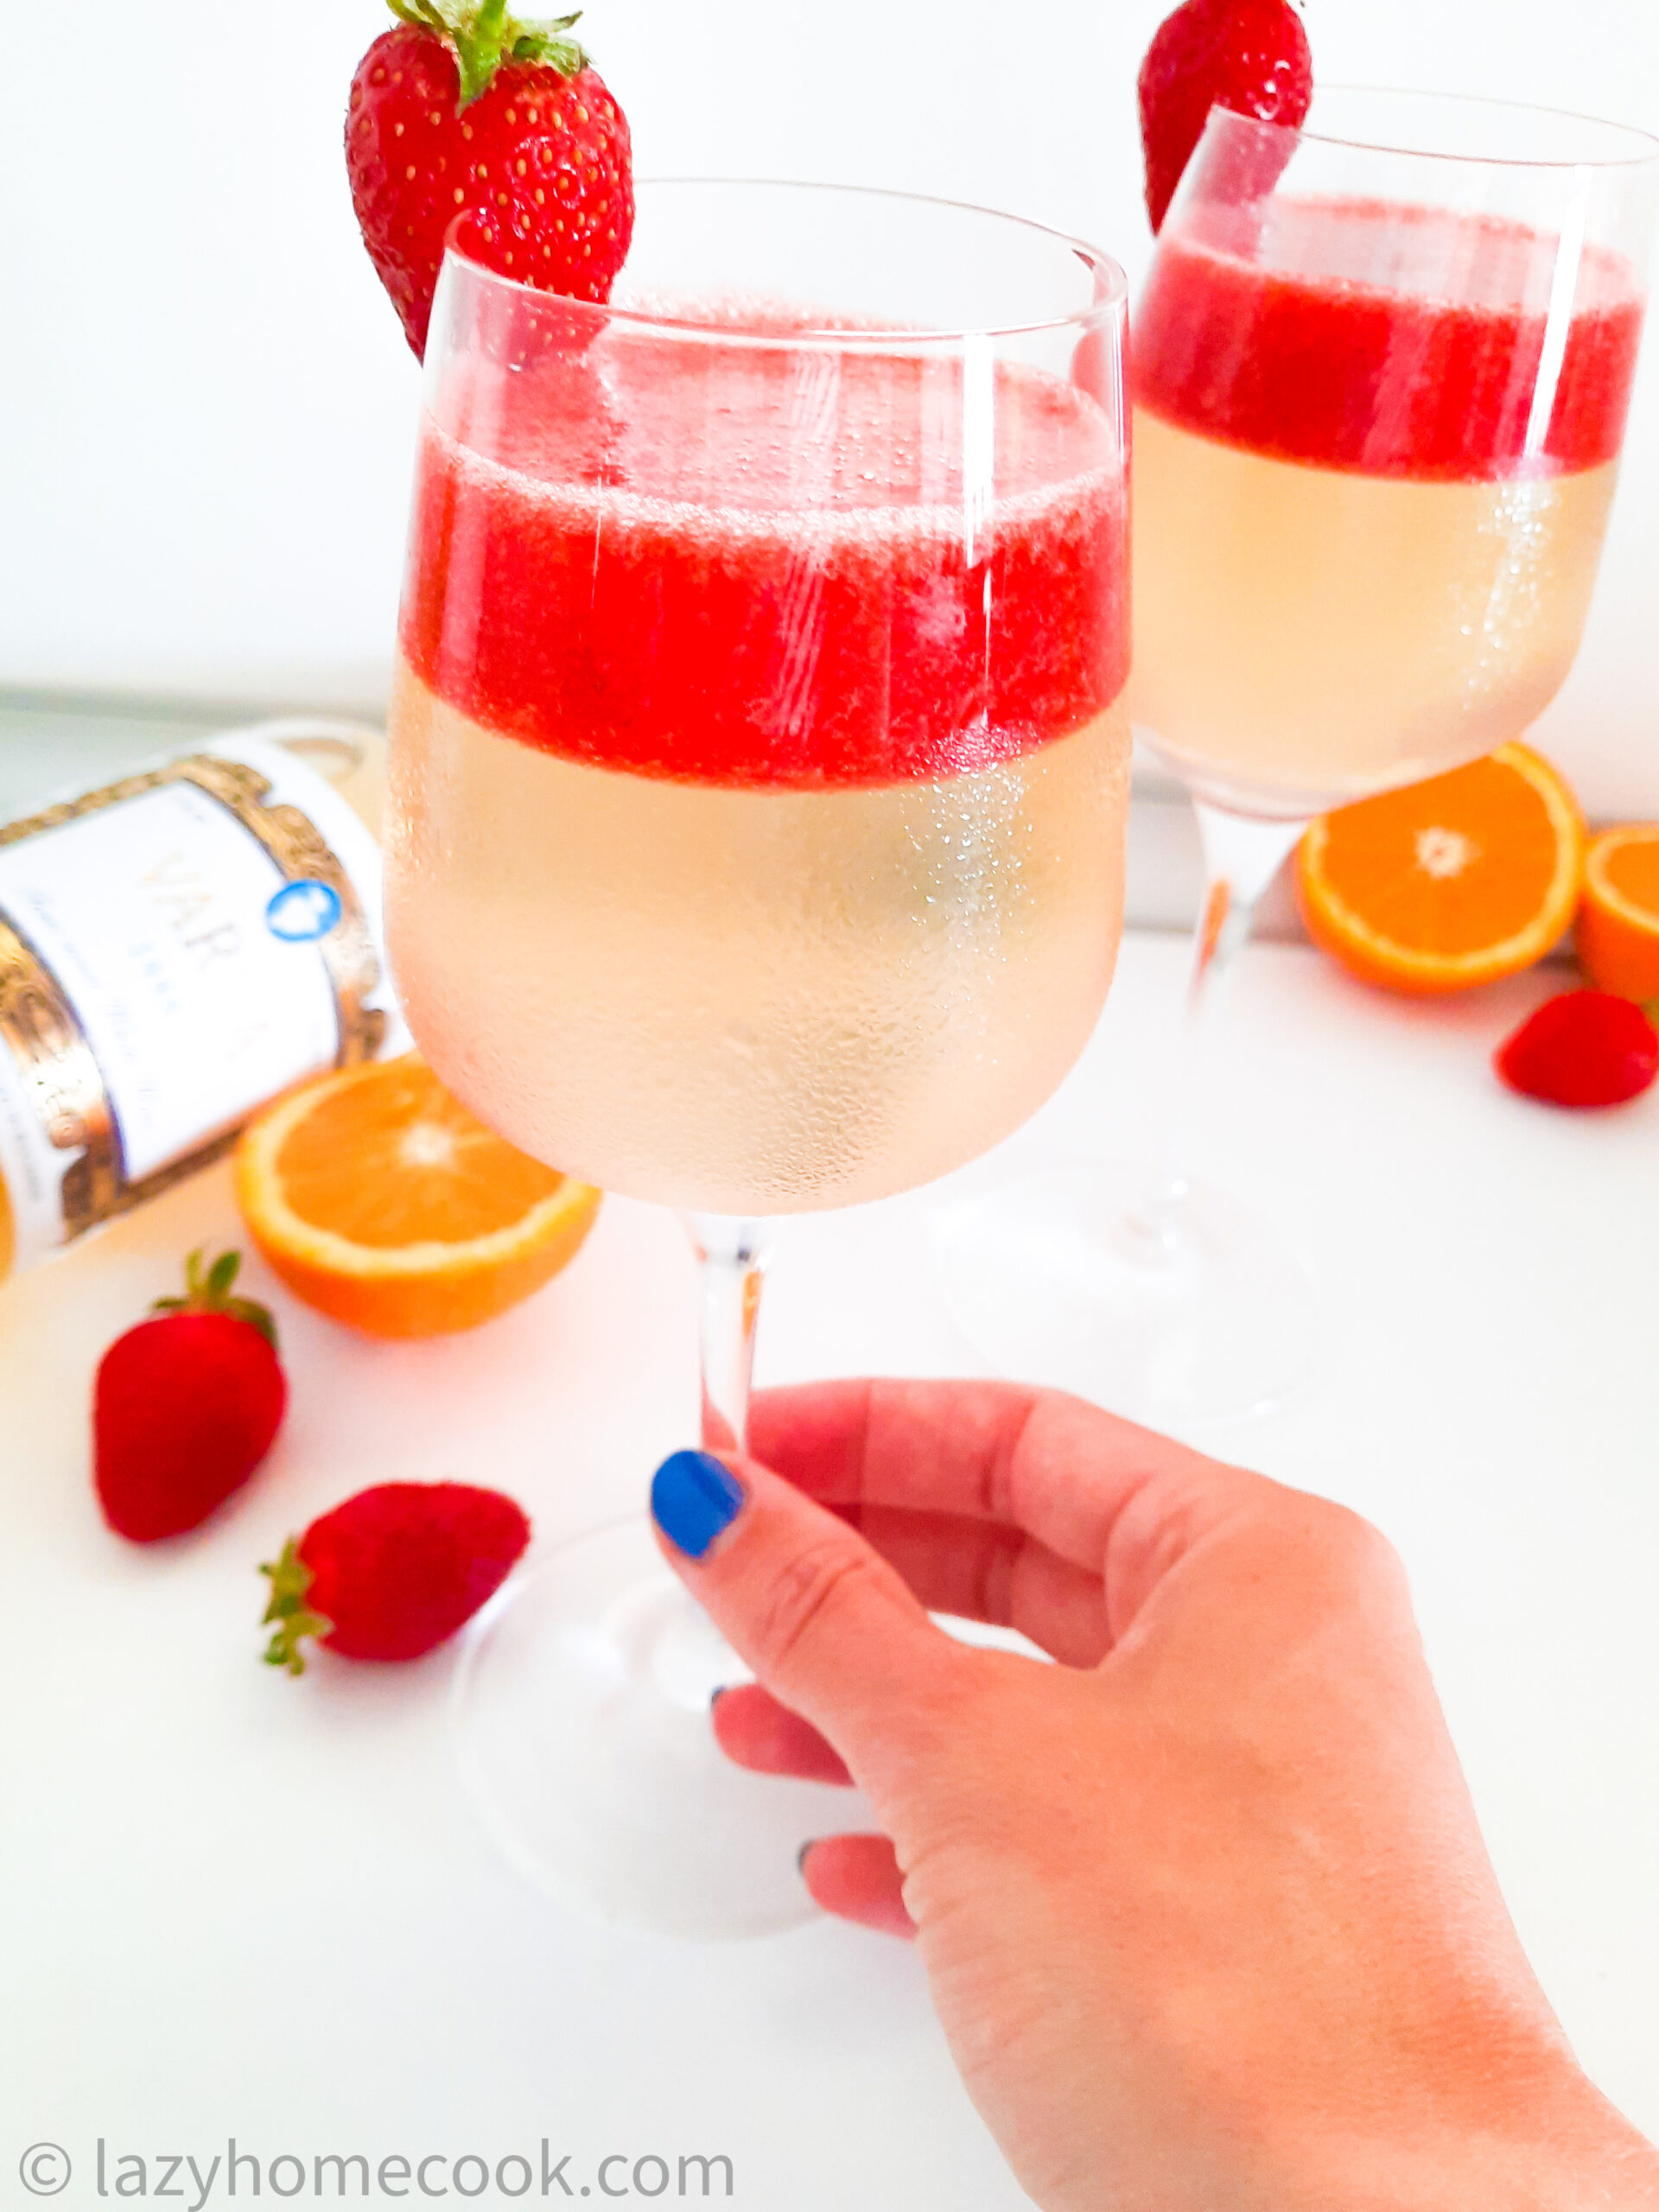 Sweet white wine jelly with strawberry sauce recipe